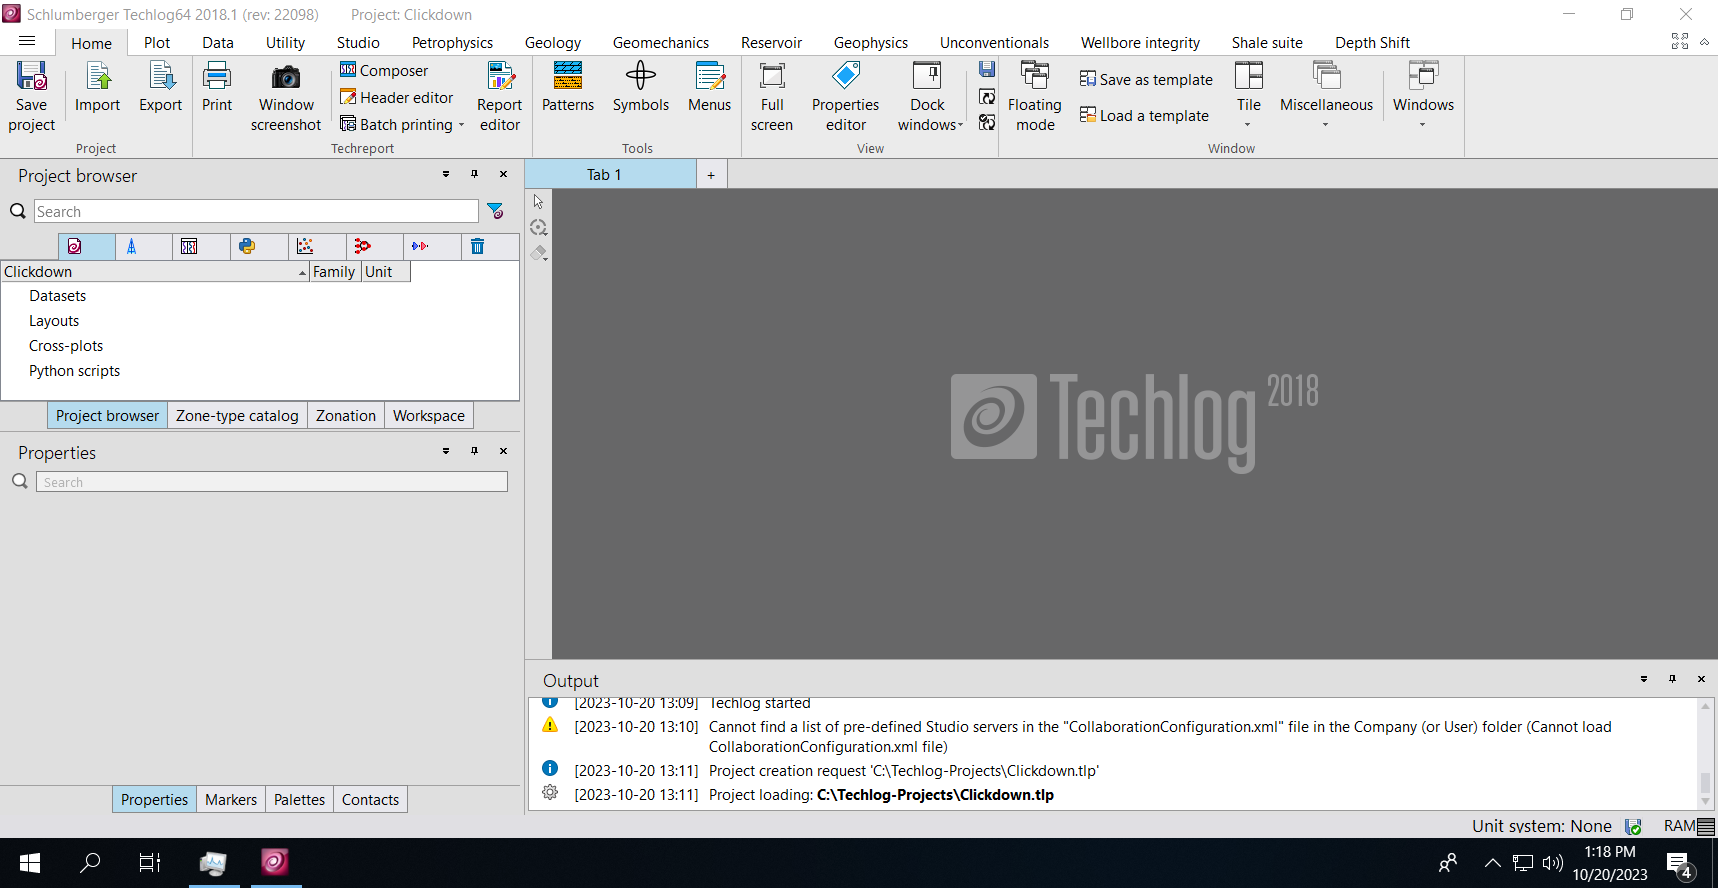 Working with Schlumberger Techlog 2018.1 full license